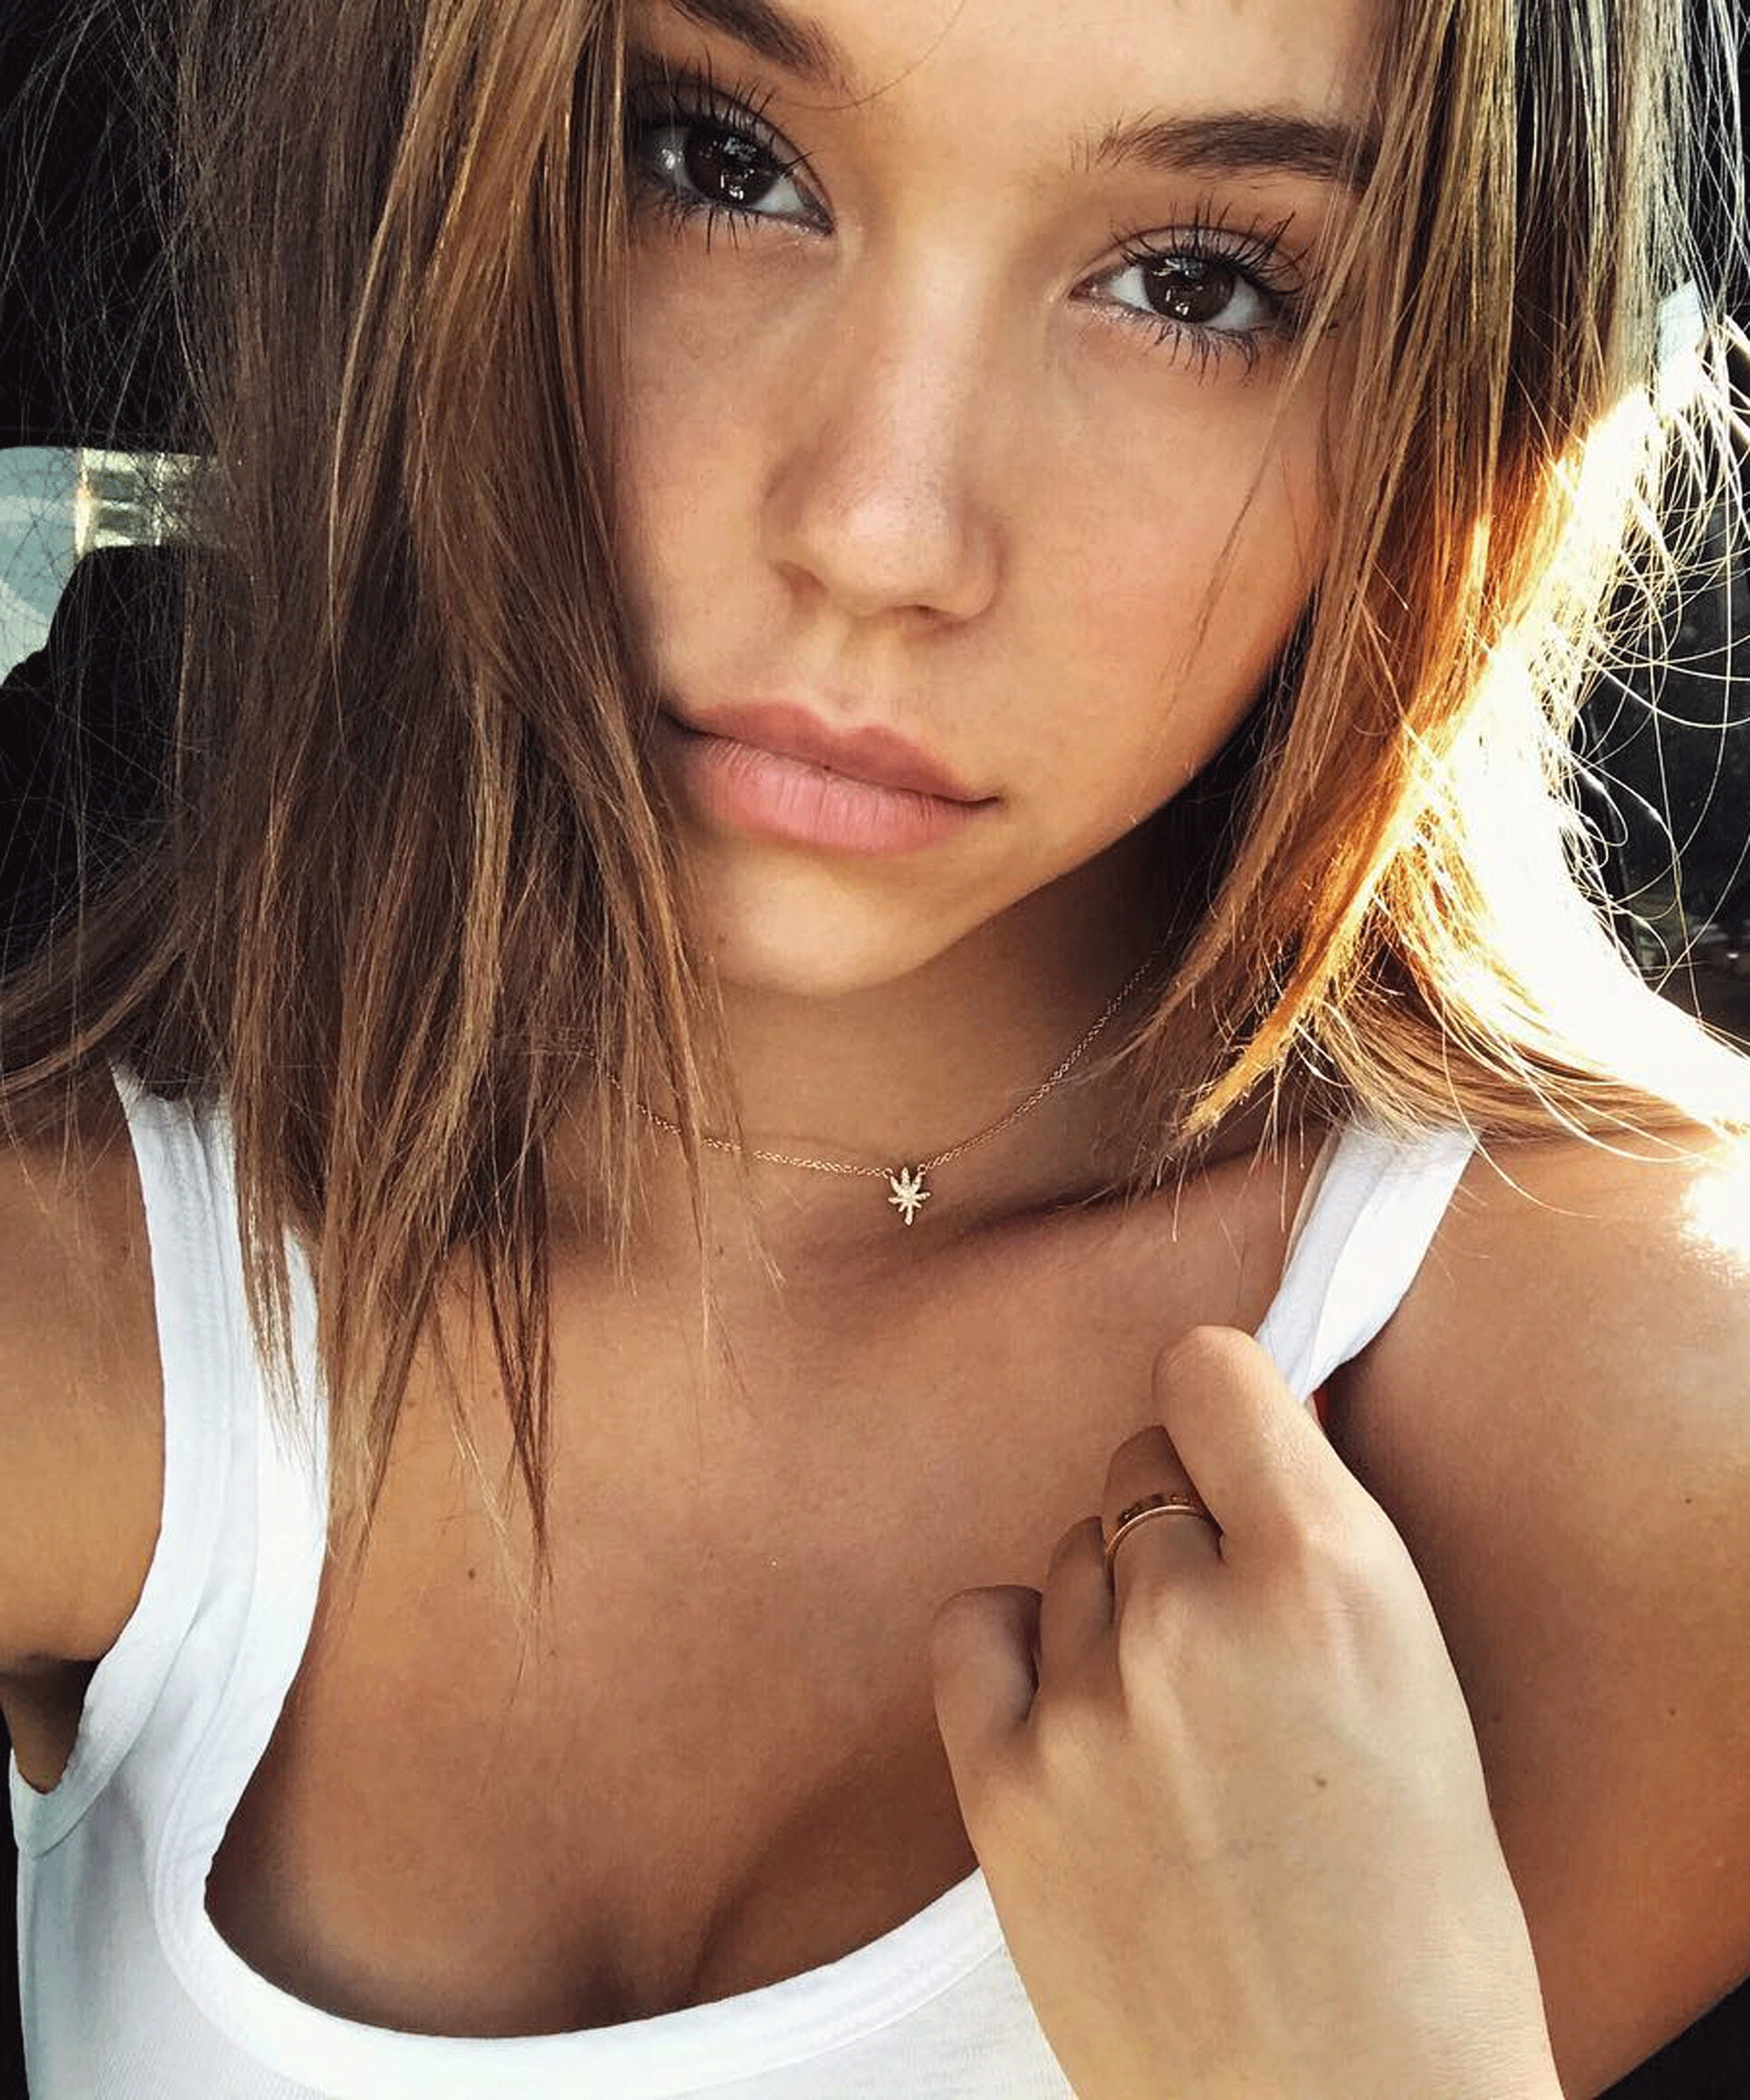 cody kishpaugh recommends Alexis Ren See Through